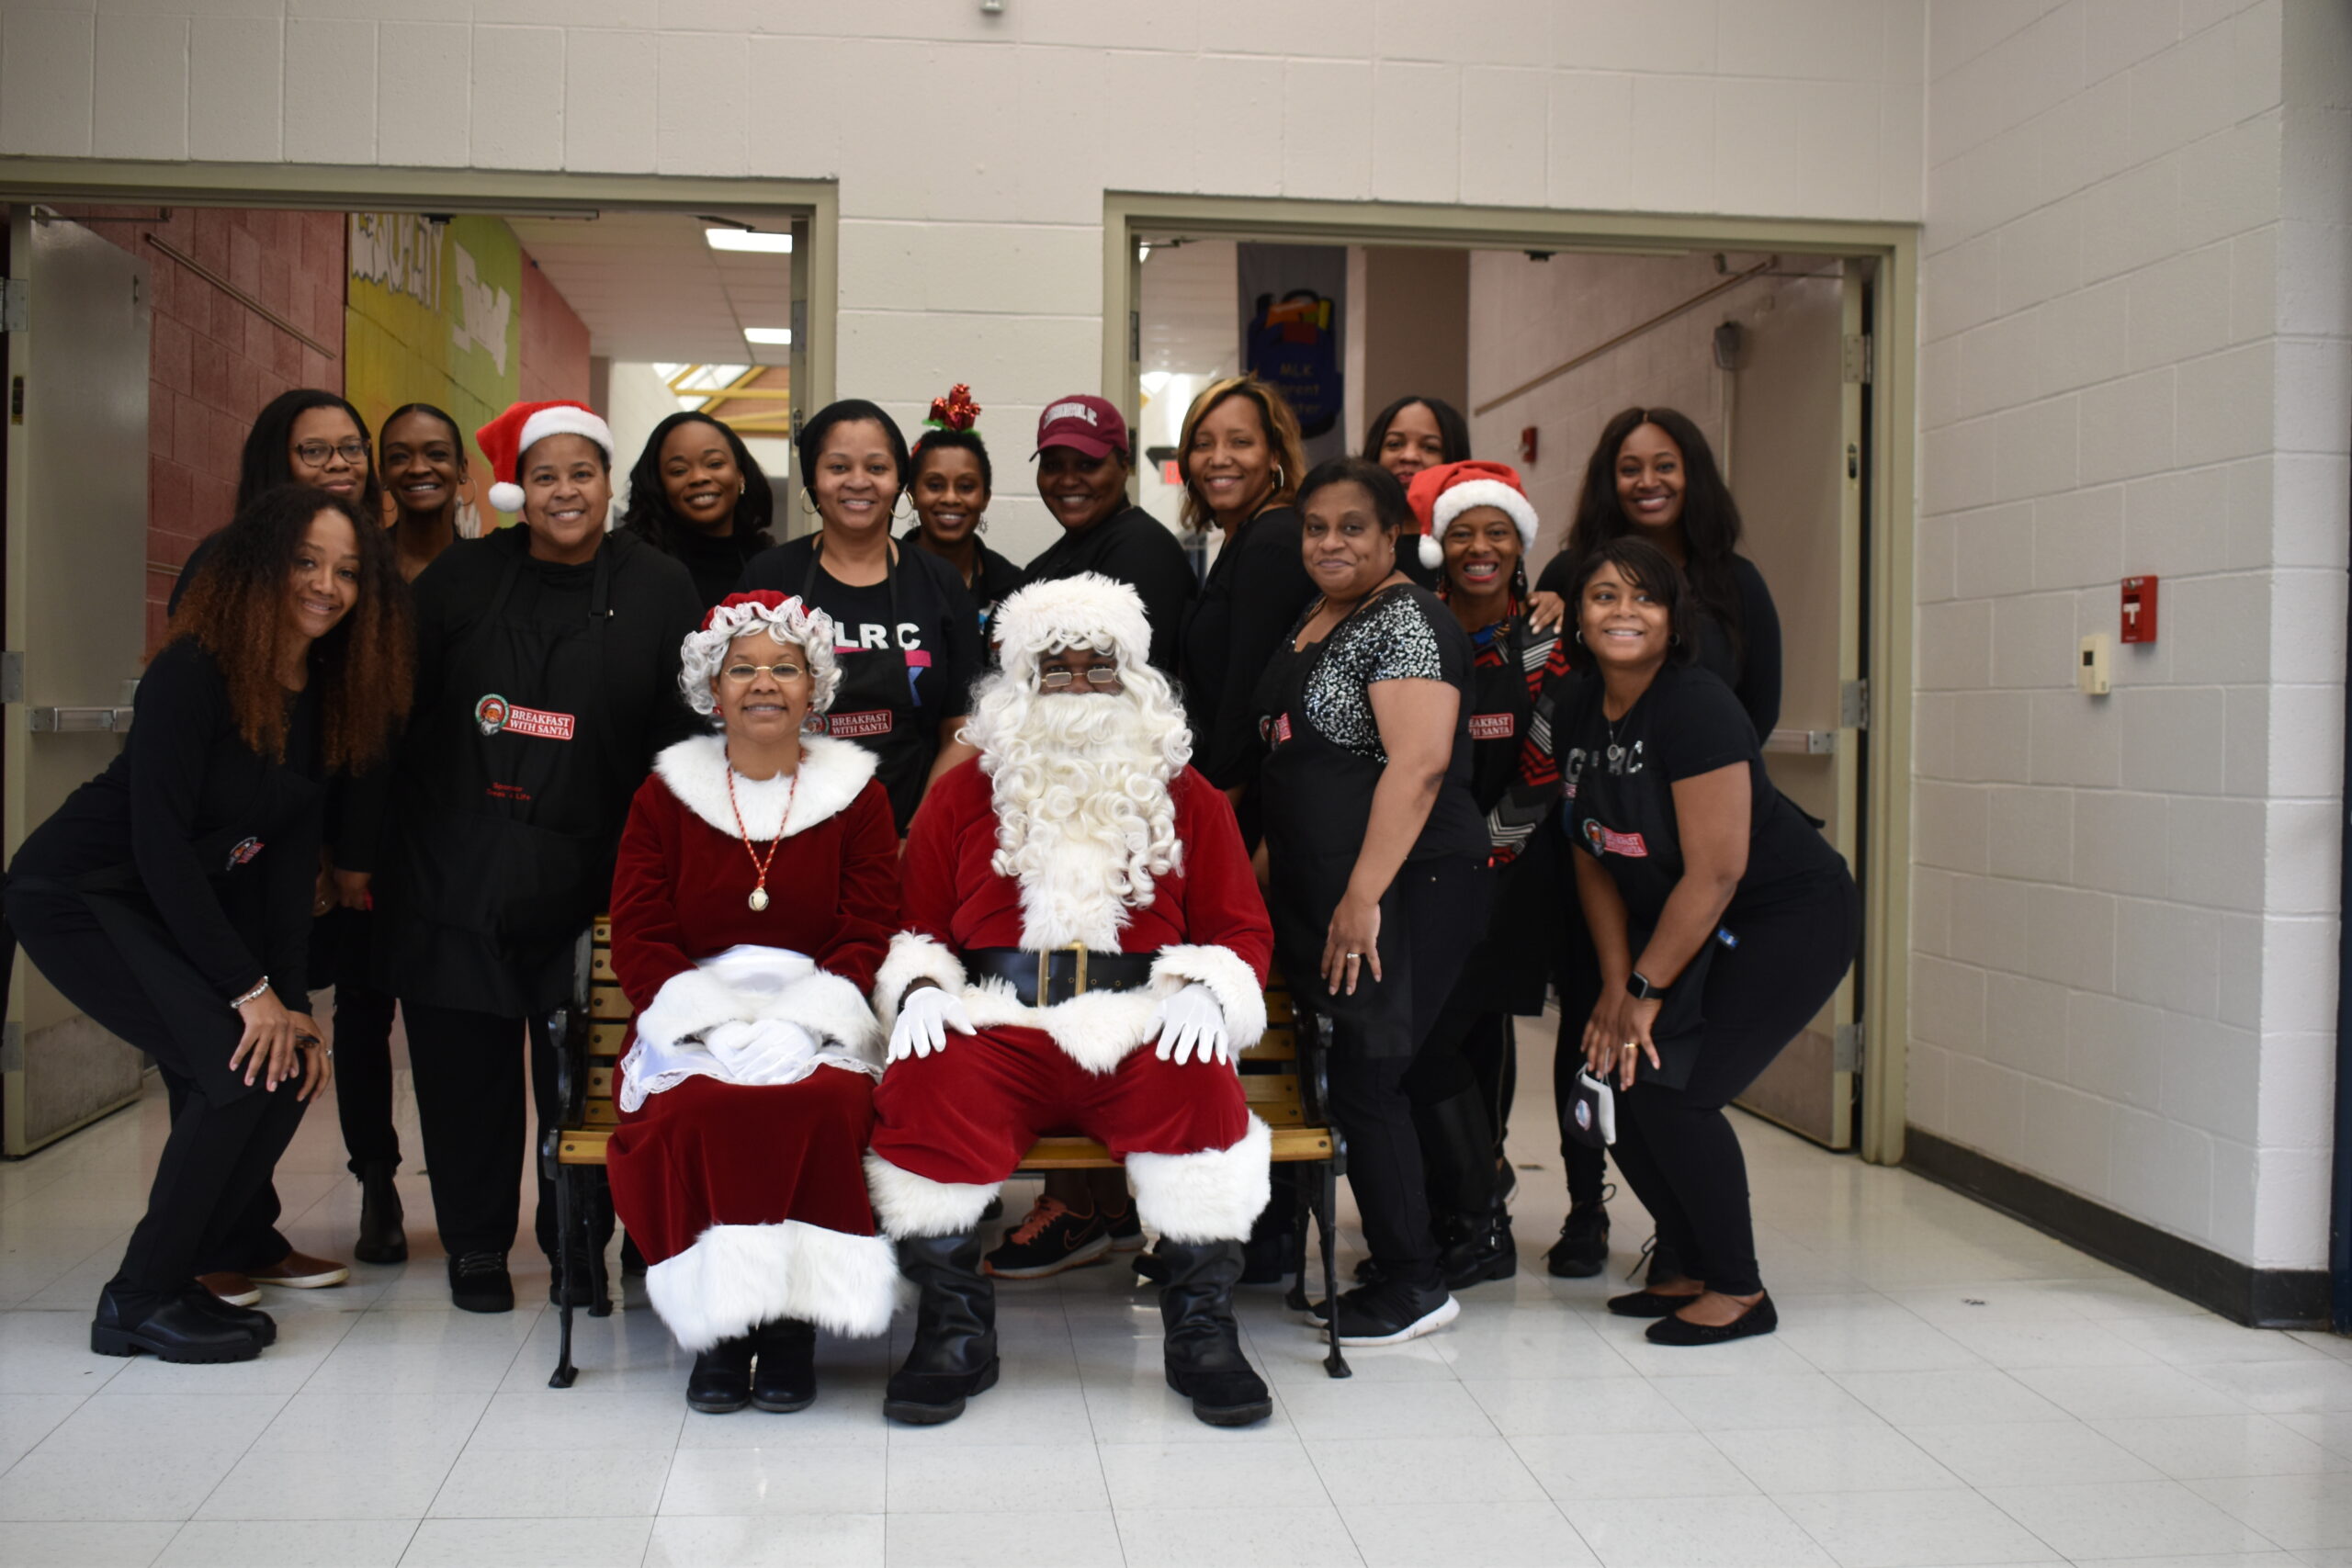 Jack & Jill of Greater Little Rock members with Santa & Mrs. Claus